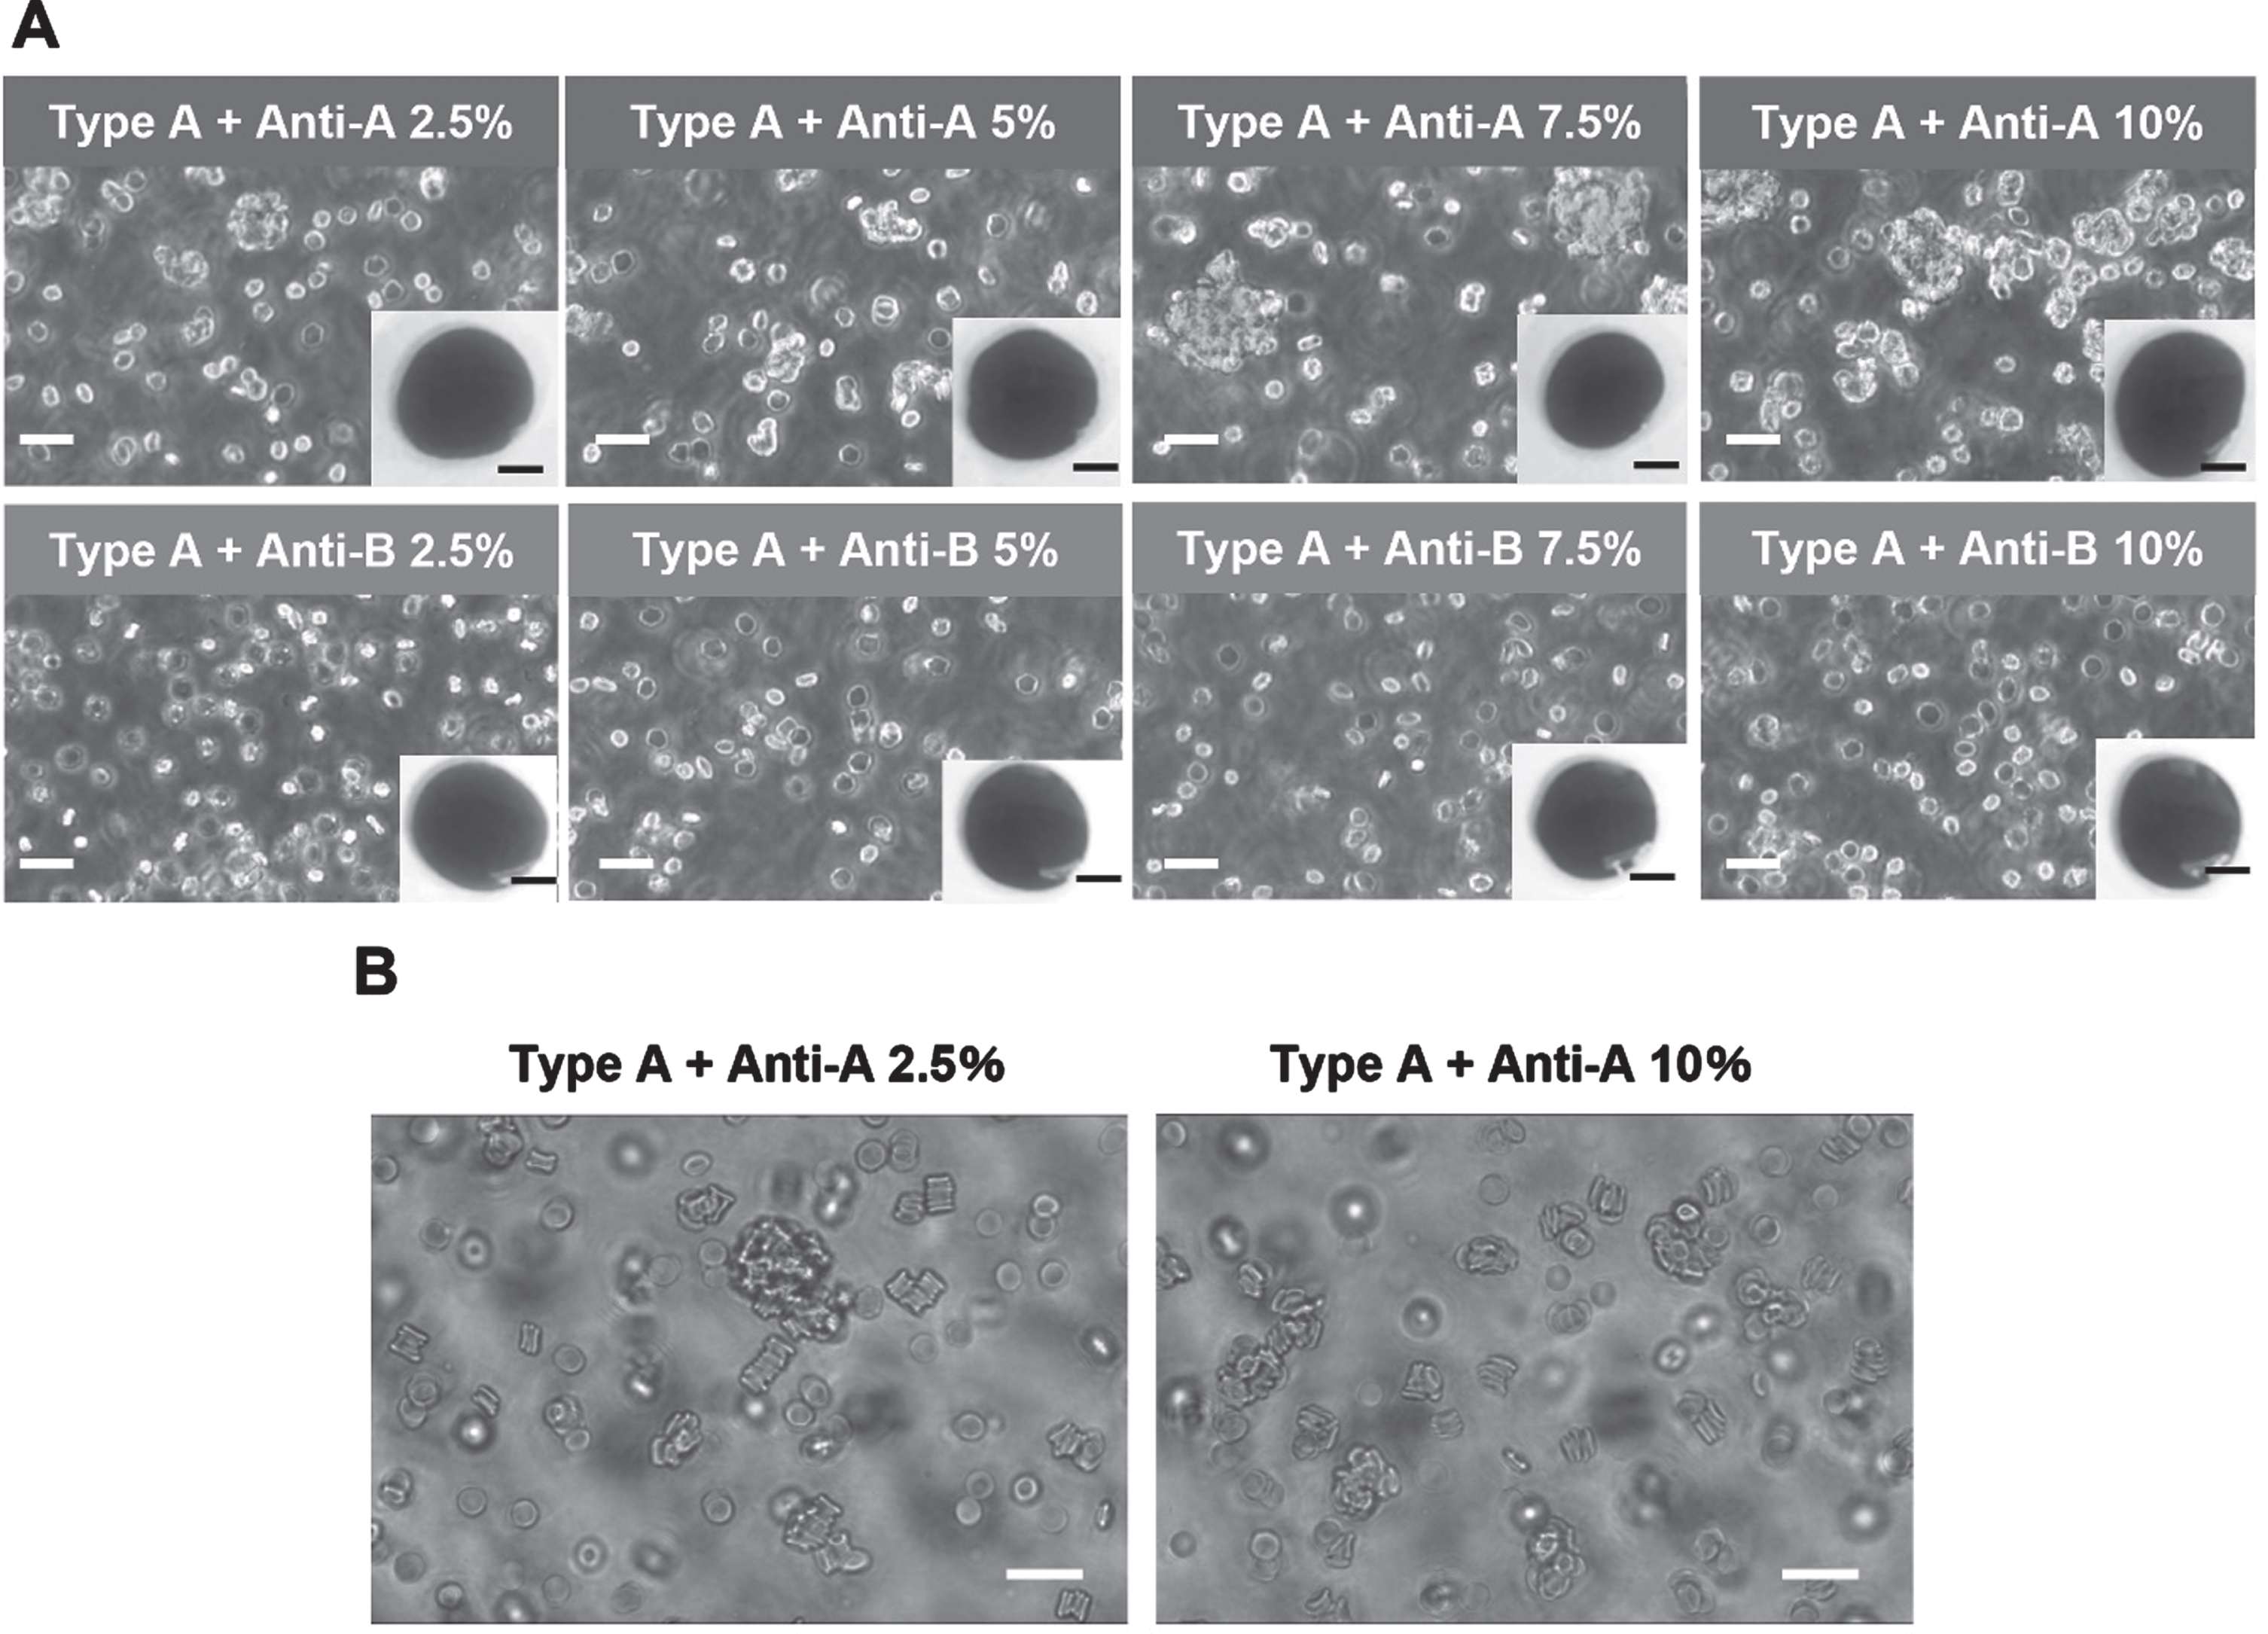 Microscope images of a representative sample mixed with antibody reagent. (A) Microscope images of samples diluted with saline at antibody reagent volume ratios of 2.5%, 5.0%, 7.5%, and 10% (scale bar: 20μm). The inset at the lower right of each panel shows a representative drop of sample before dilution with saline (scale bar: 5 mm). (B) Microscope images of type A blood diluted with autologous plasma at antibody reagent volume ratios of 2.5% and 10% (scale bar: 20μm).